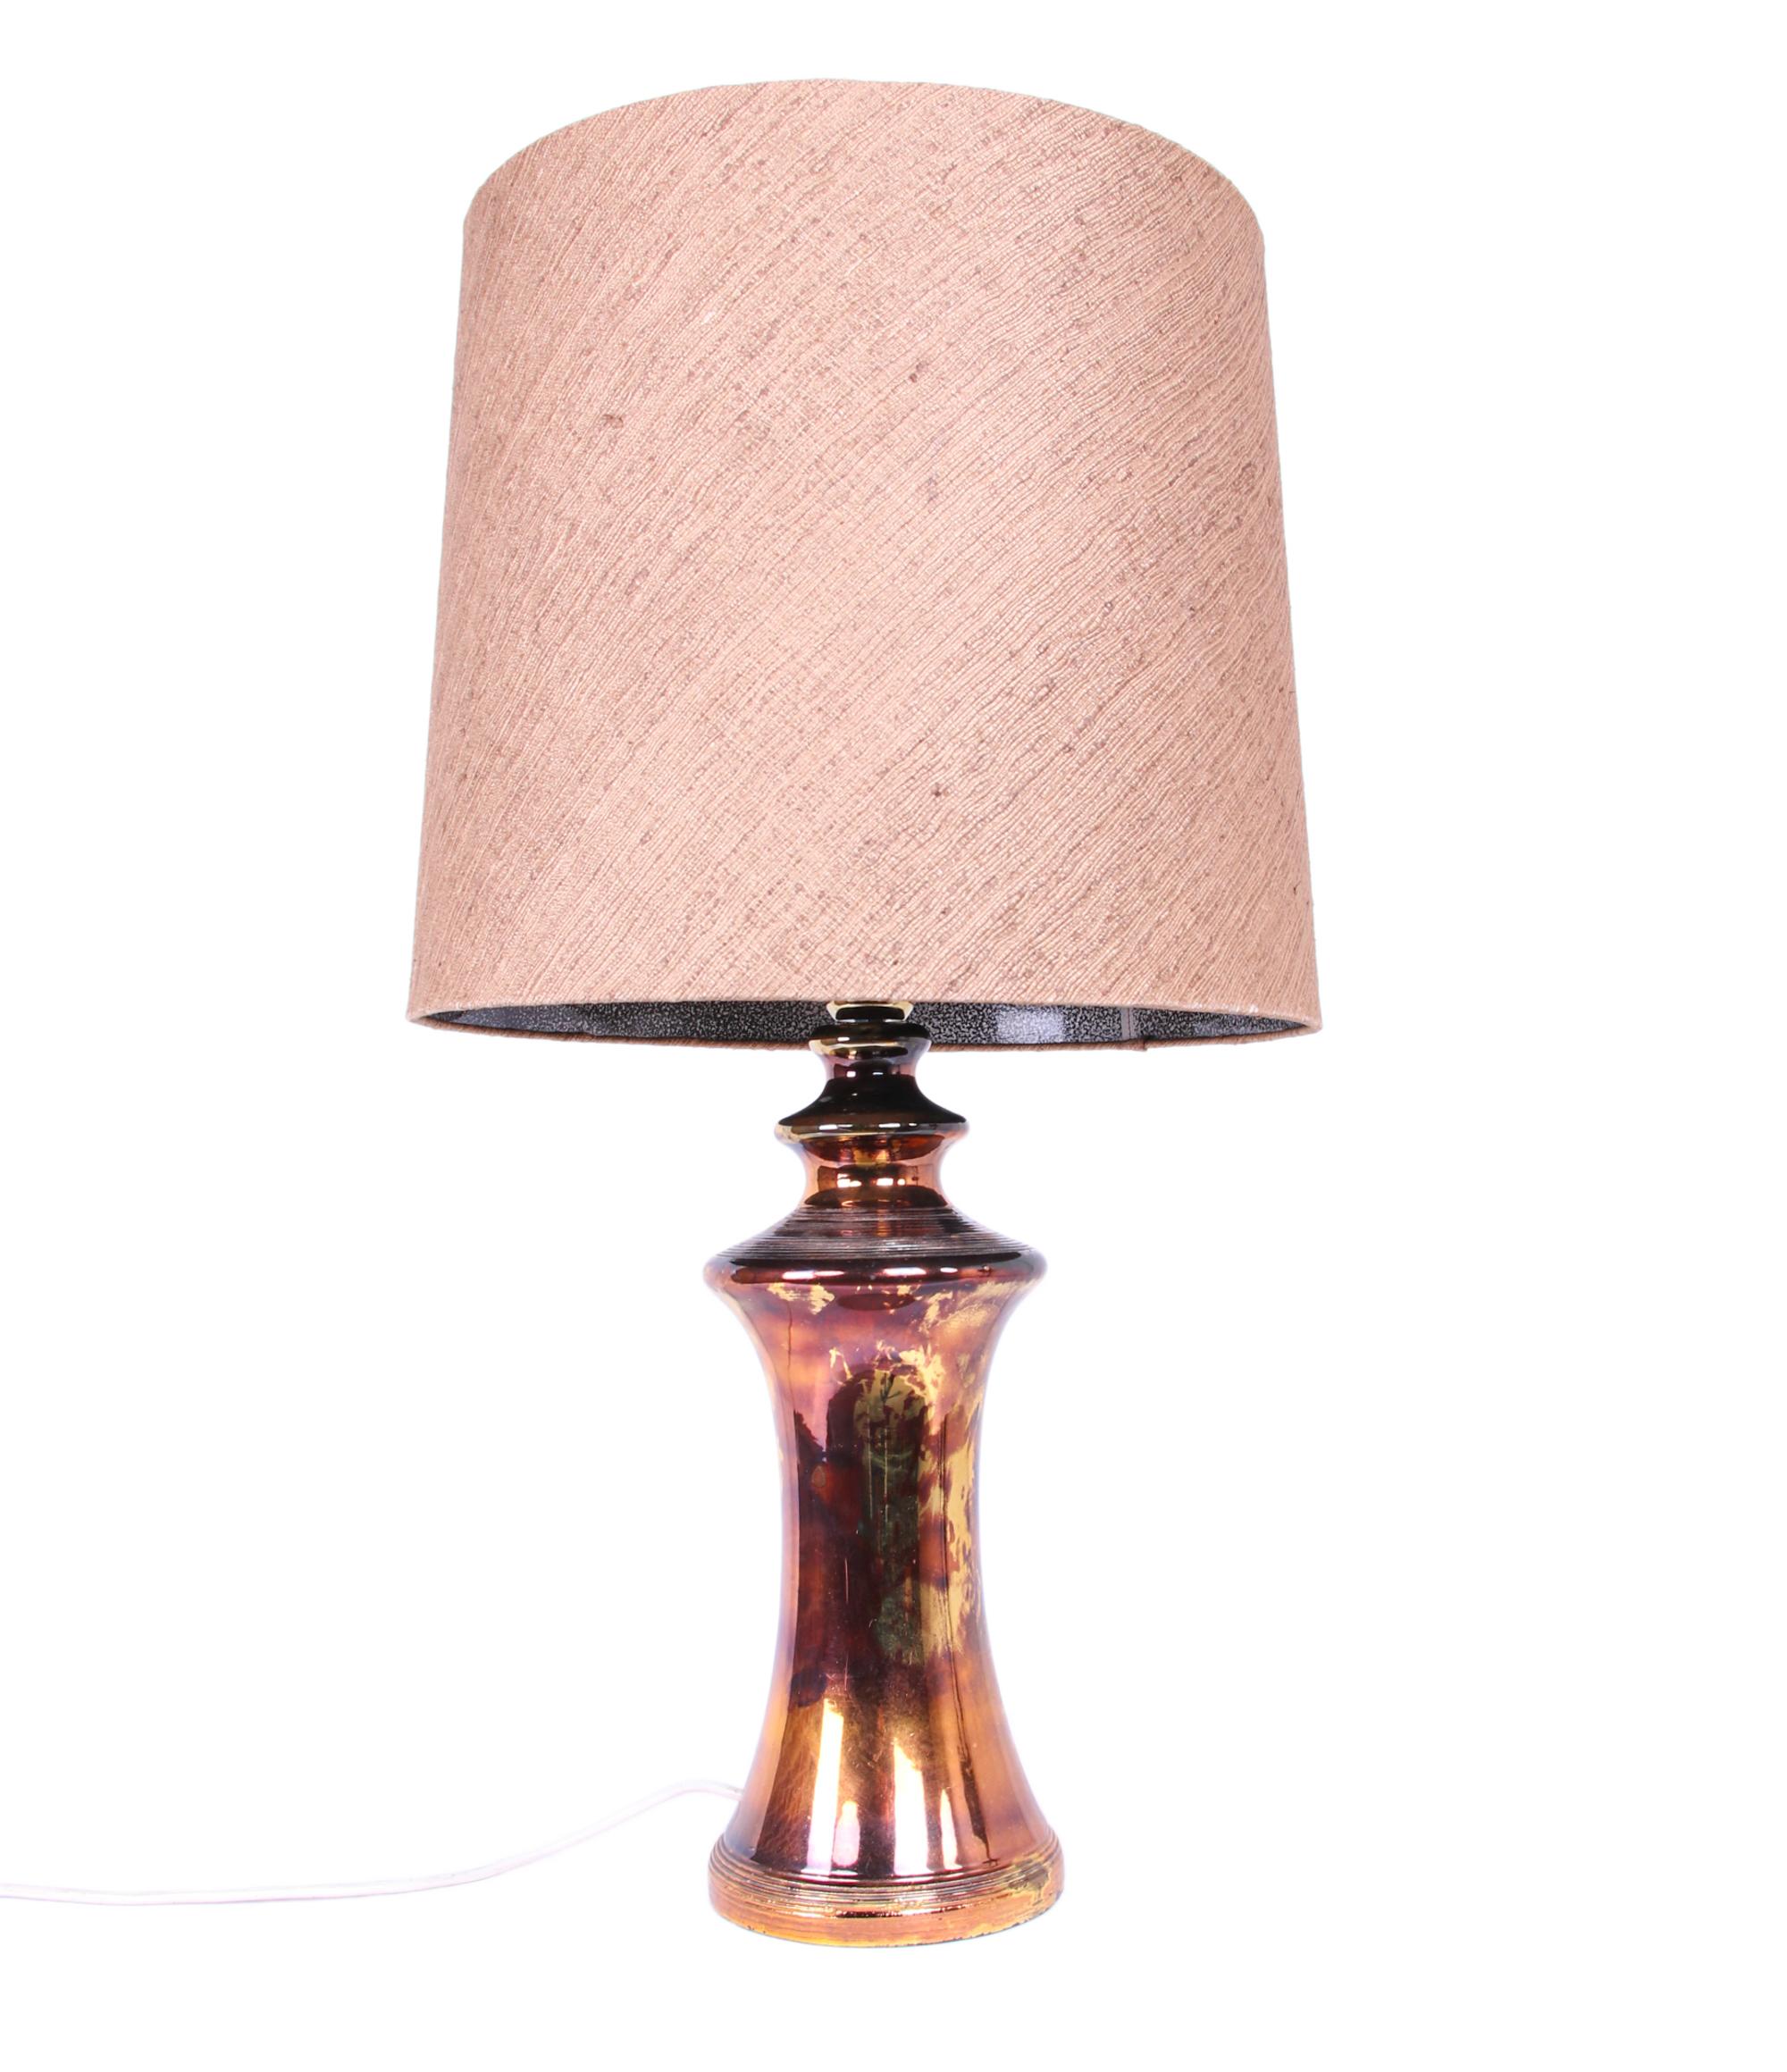 Exceptional handcrafted table lamp by Bitossi, Italy, 1960s. This large lamp in ceramic covered with bronze and gold luster glaze comes with the original silk shade. With this light you make a clear statement in your interior design. A real